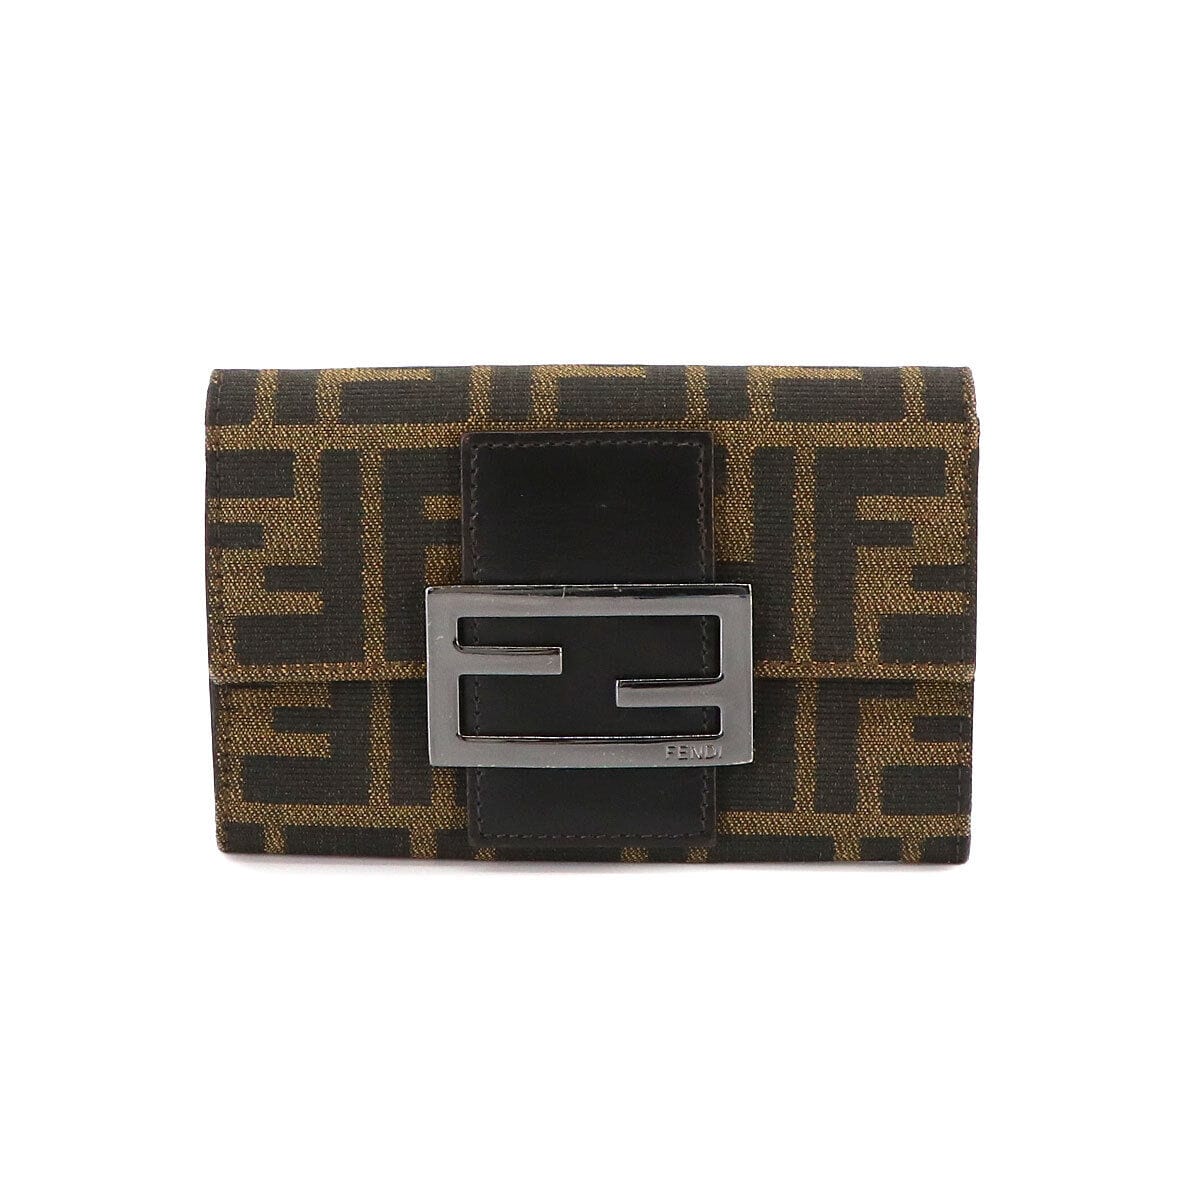 Luxury Promise Fendi Zucca Compact Wallet Canvas Leather Brown 8M0036 Purse 90231809